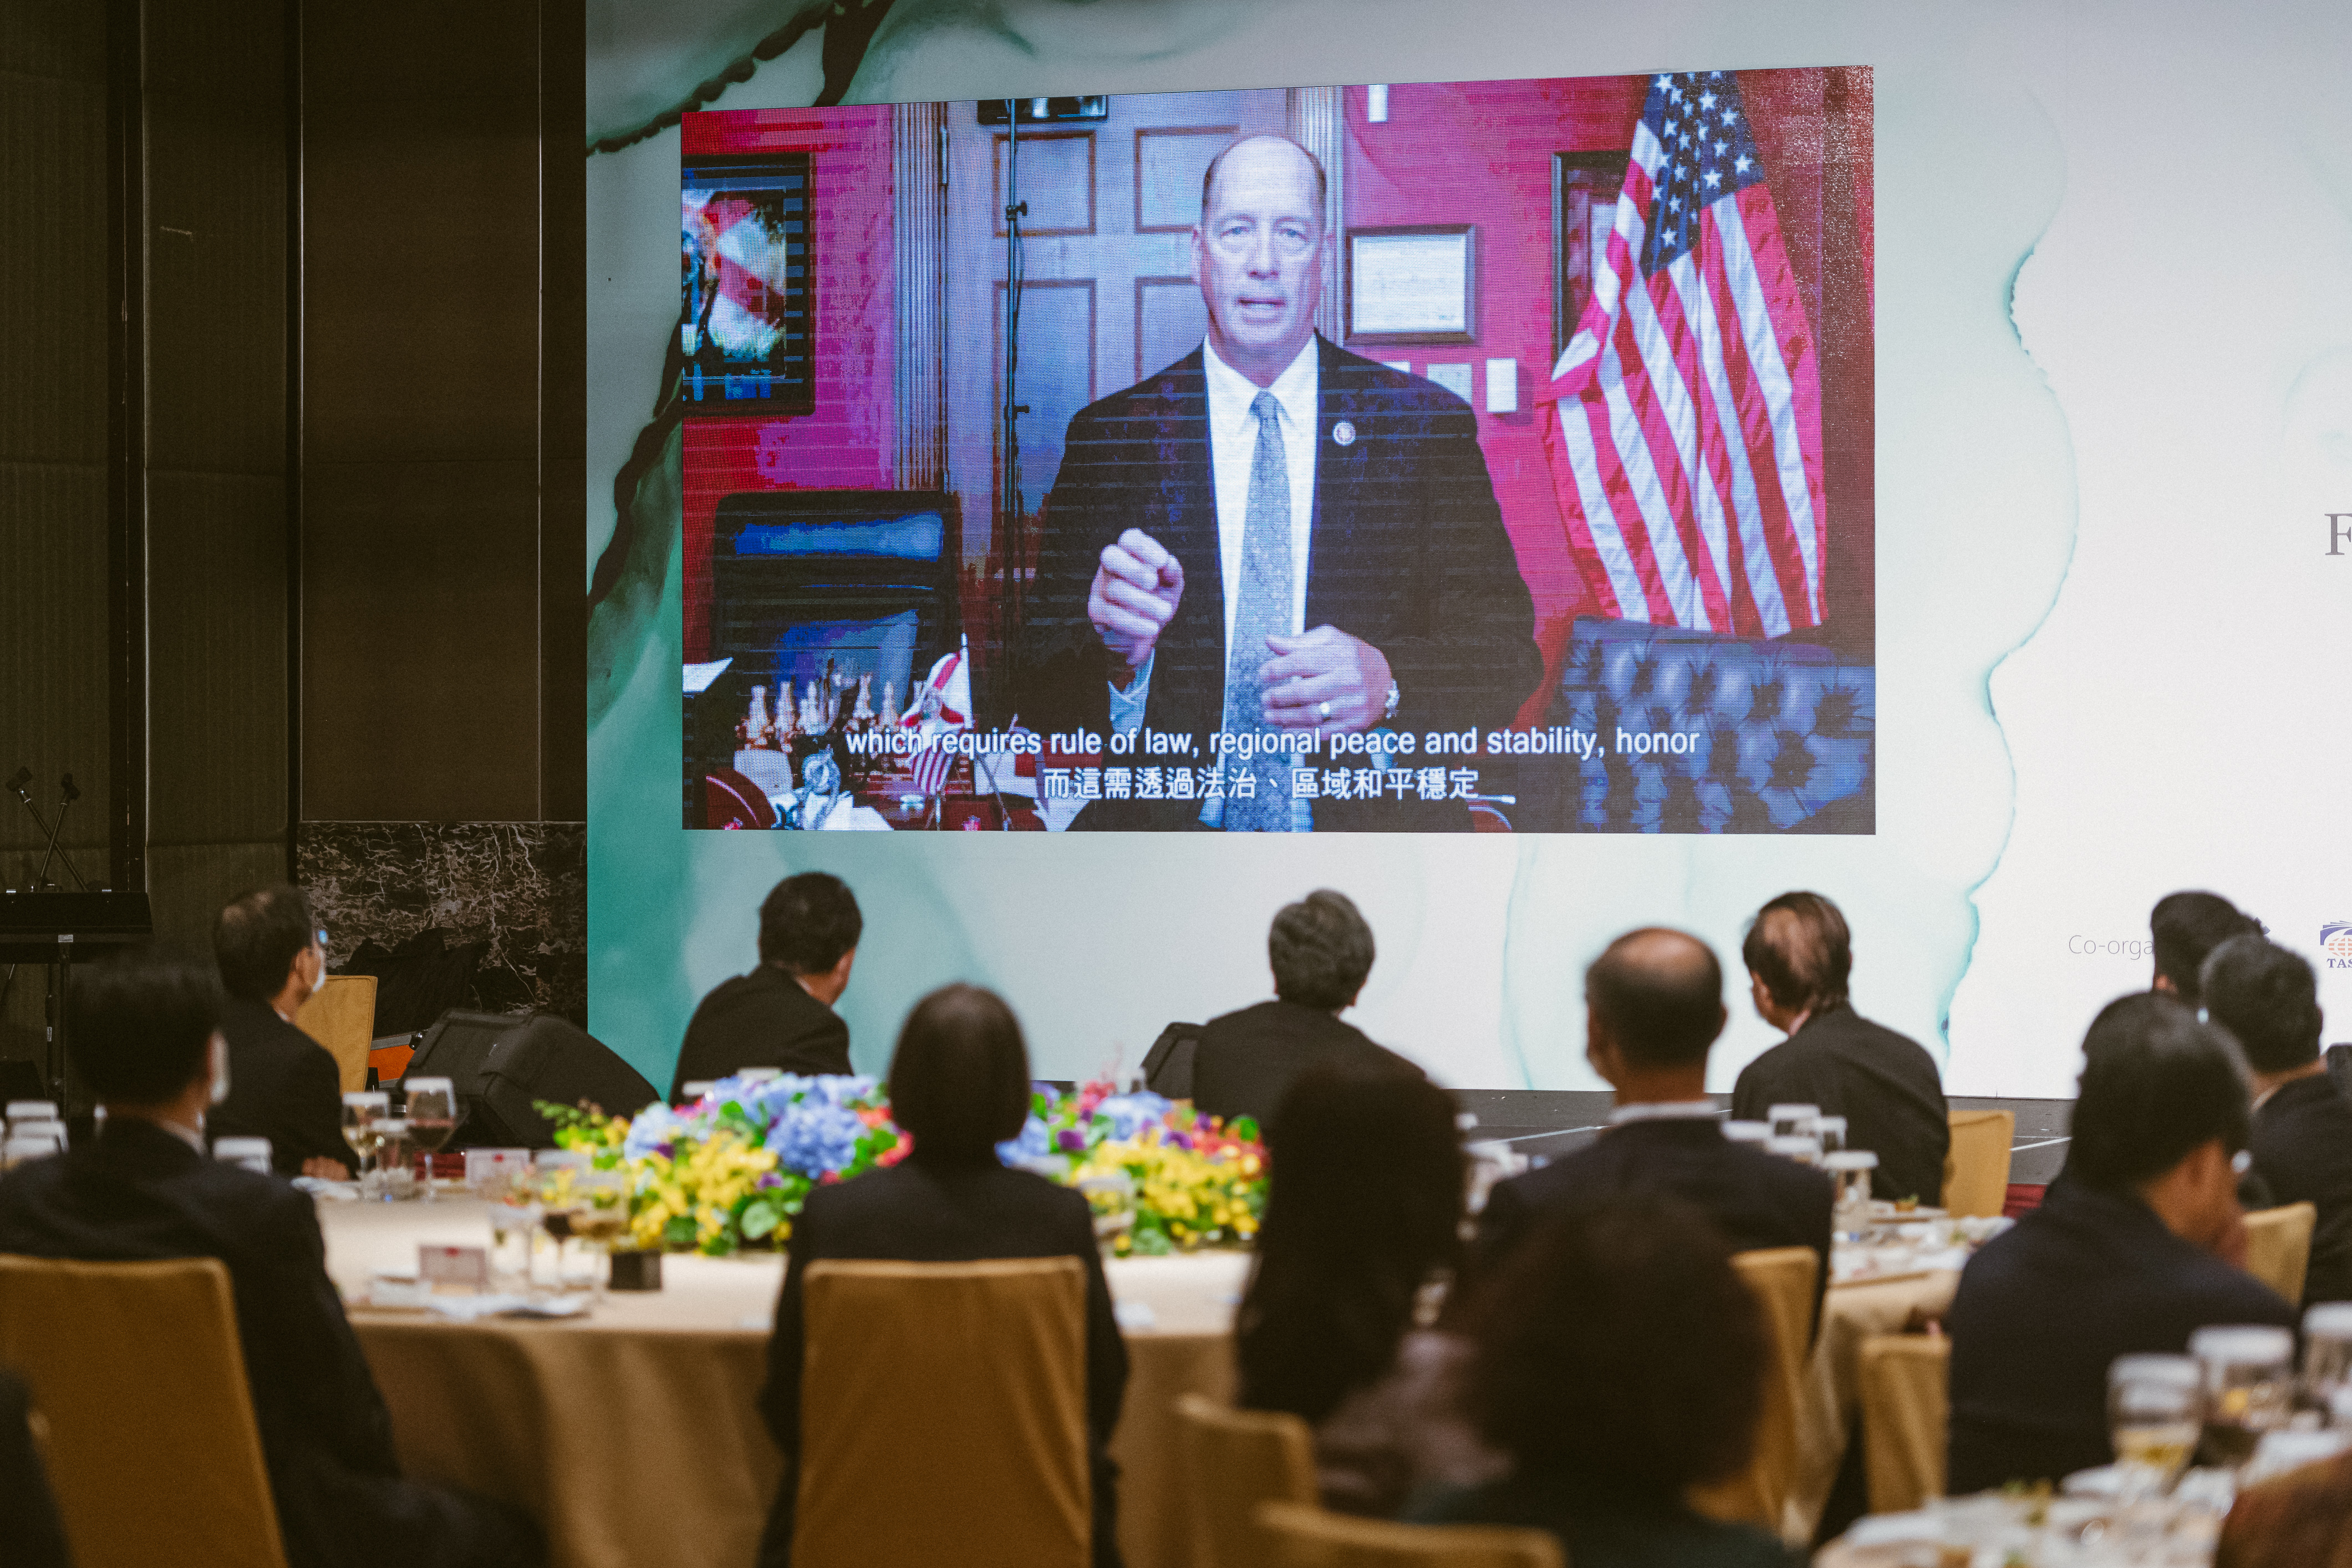 Speech by Ted Yoho, Member, House of Representatives; Ranking Member of Asia, the Pacific, and Nonproliferation Subcommittee, House Committee on Foreign Affairs, USA